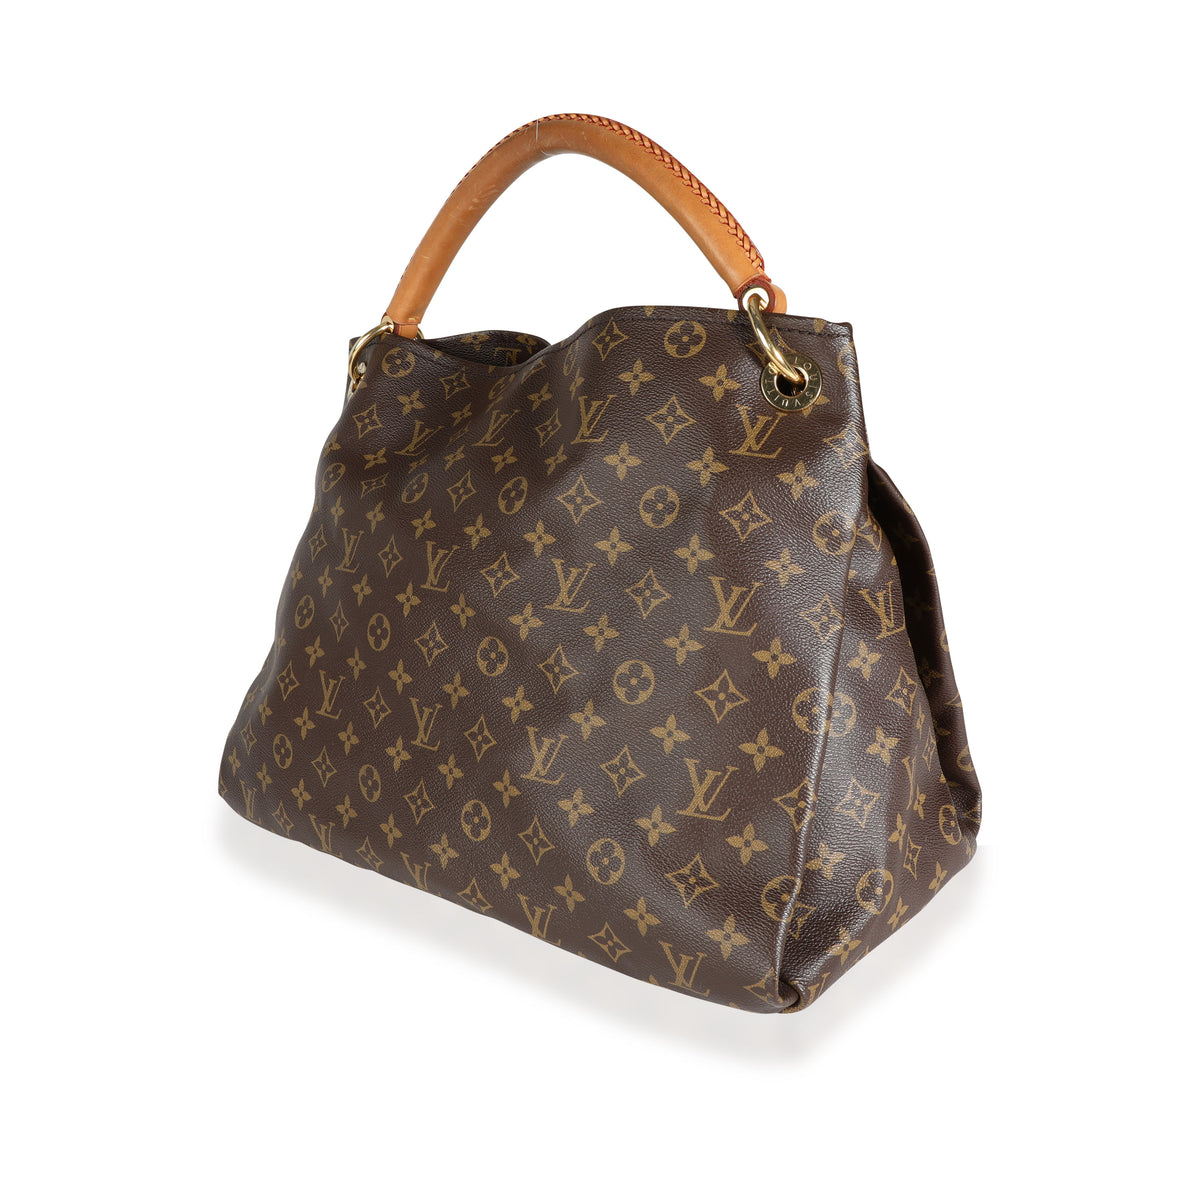 What Is The Difference Between Louis Vuitton Artsy Mm And Gm